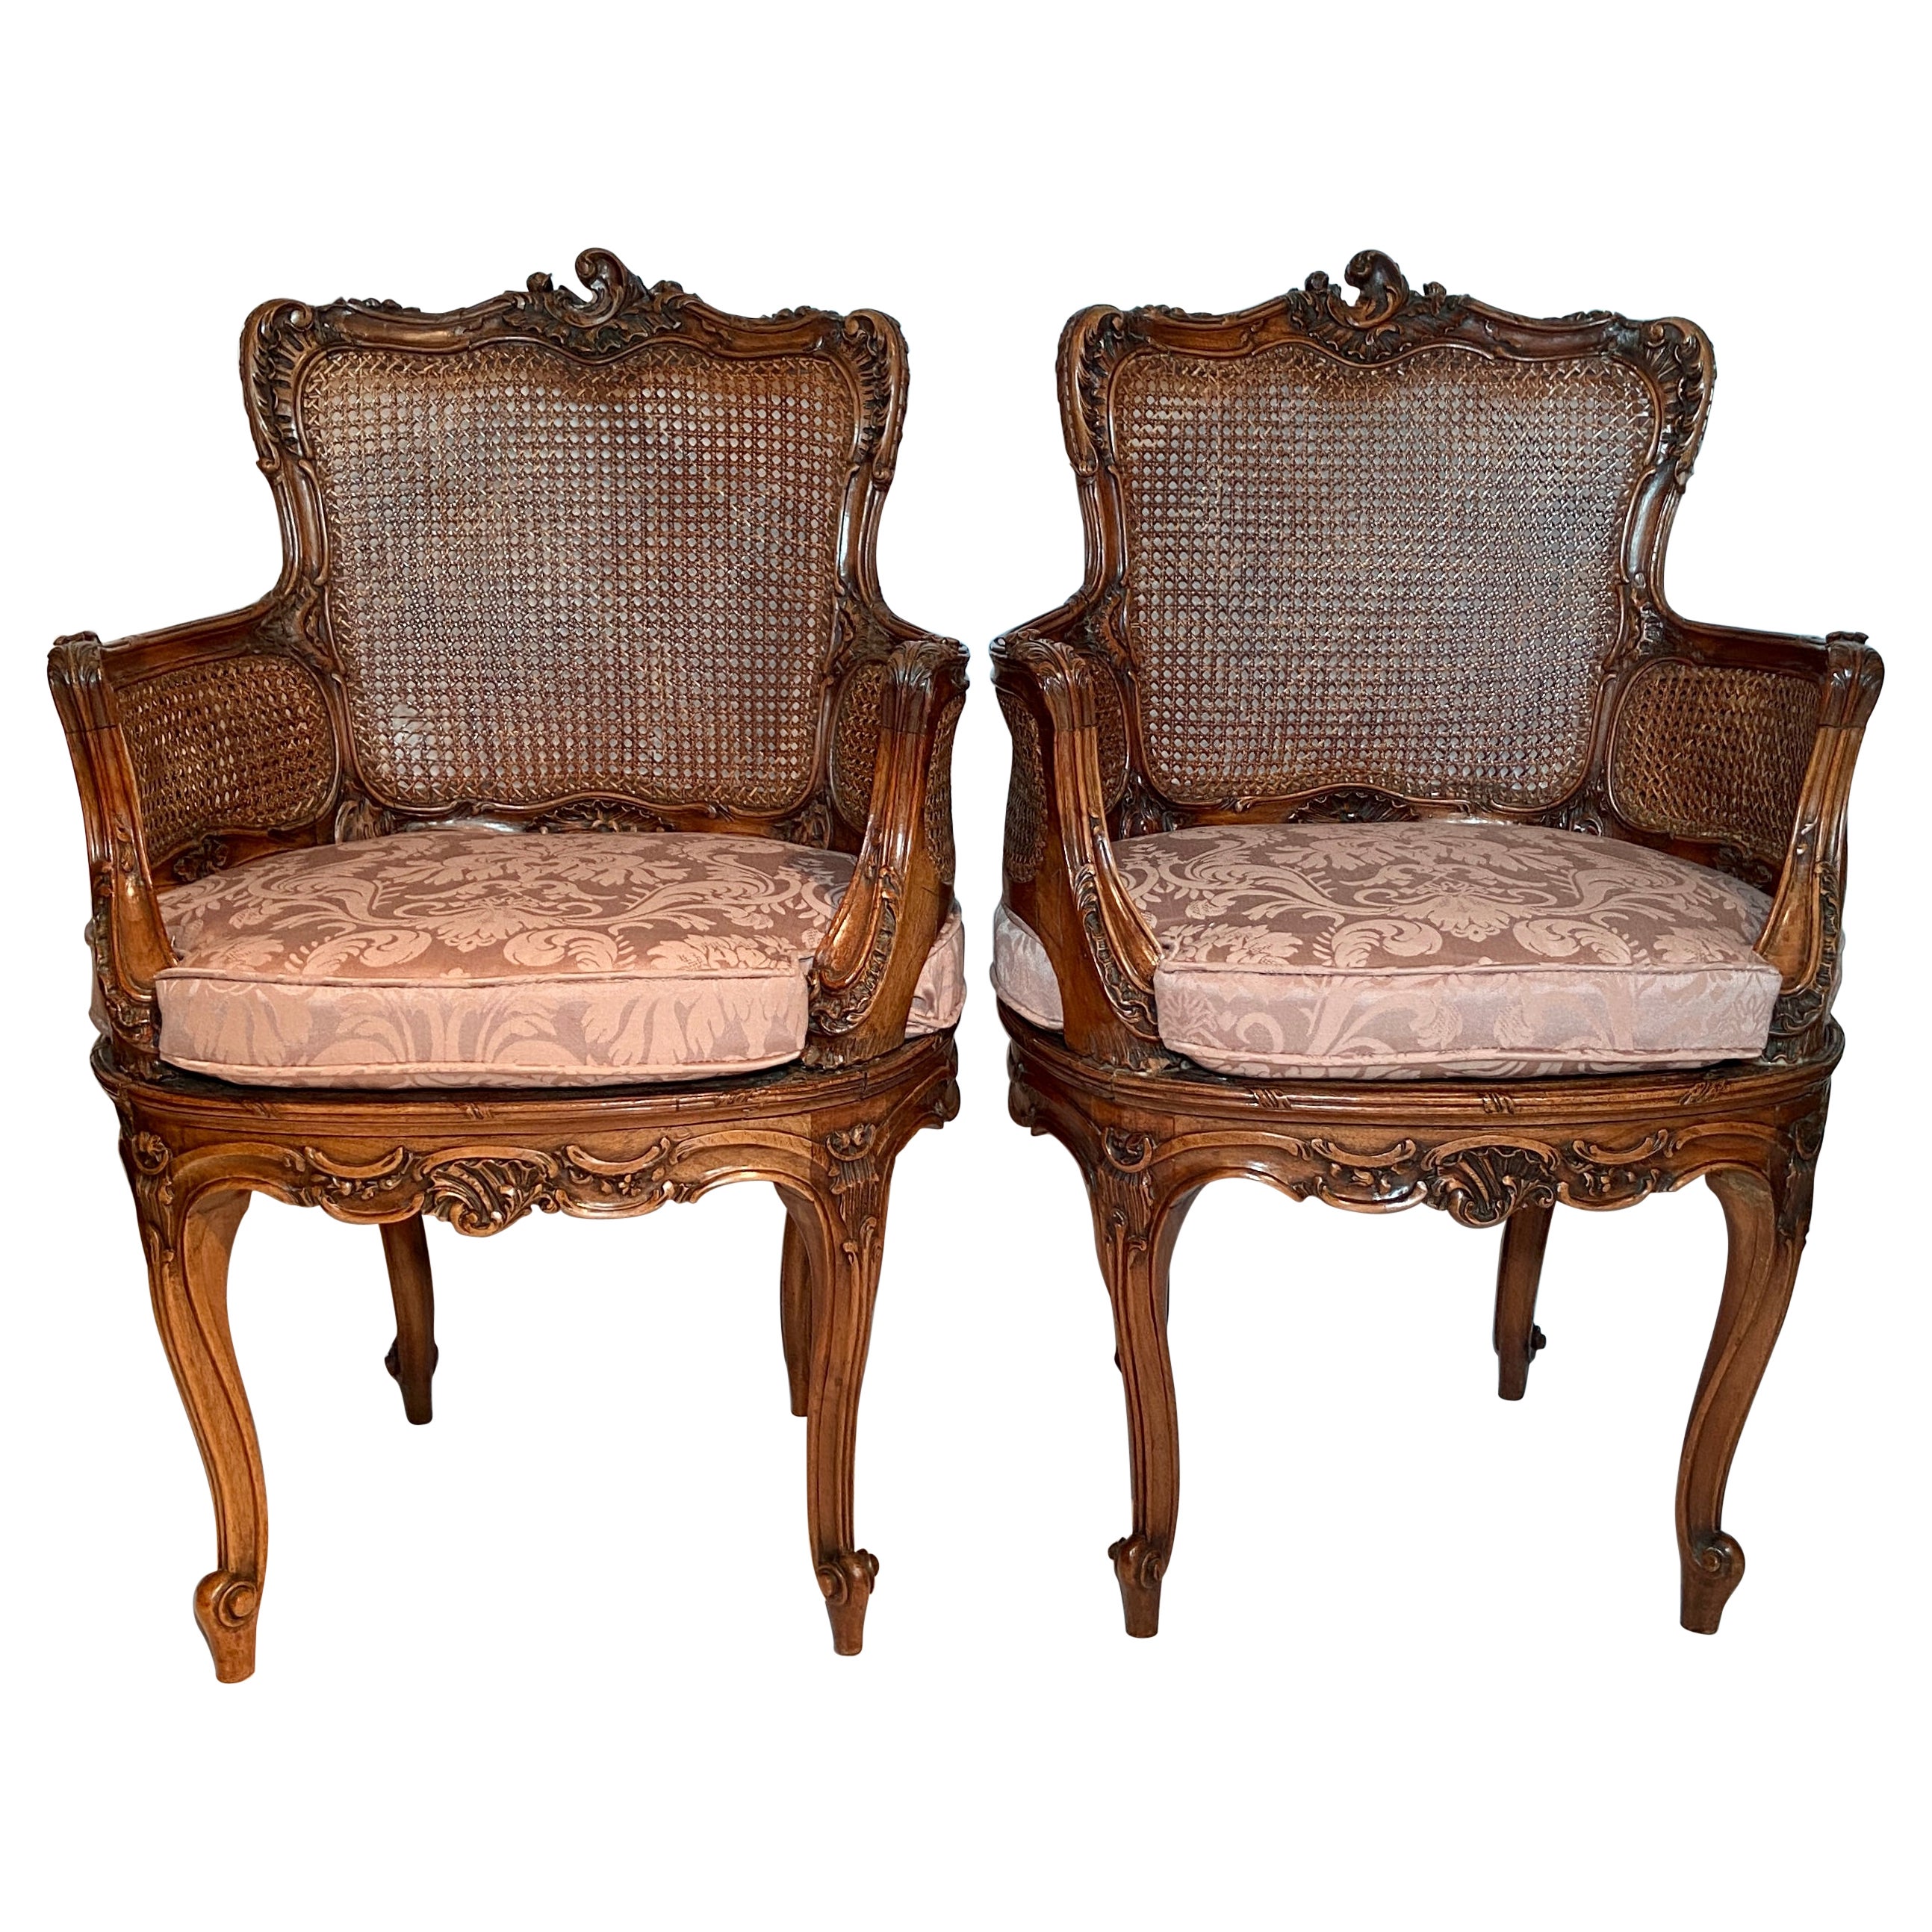 Pair Antique French Walnut & Cane Arm Chairs with Carved Backs, Circa 1890s For Sale